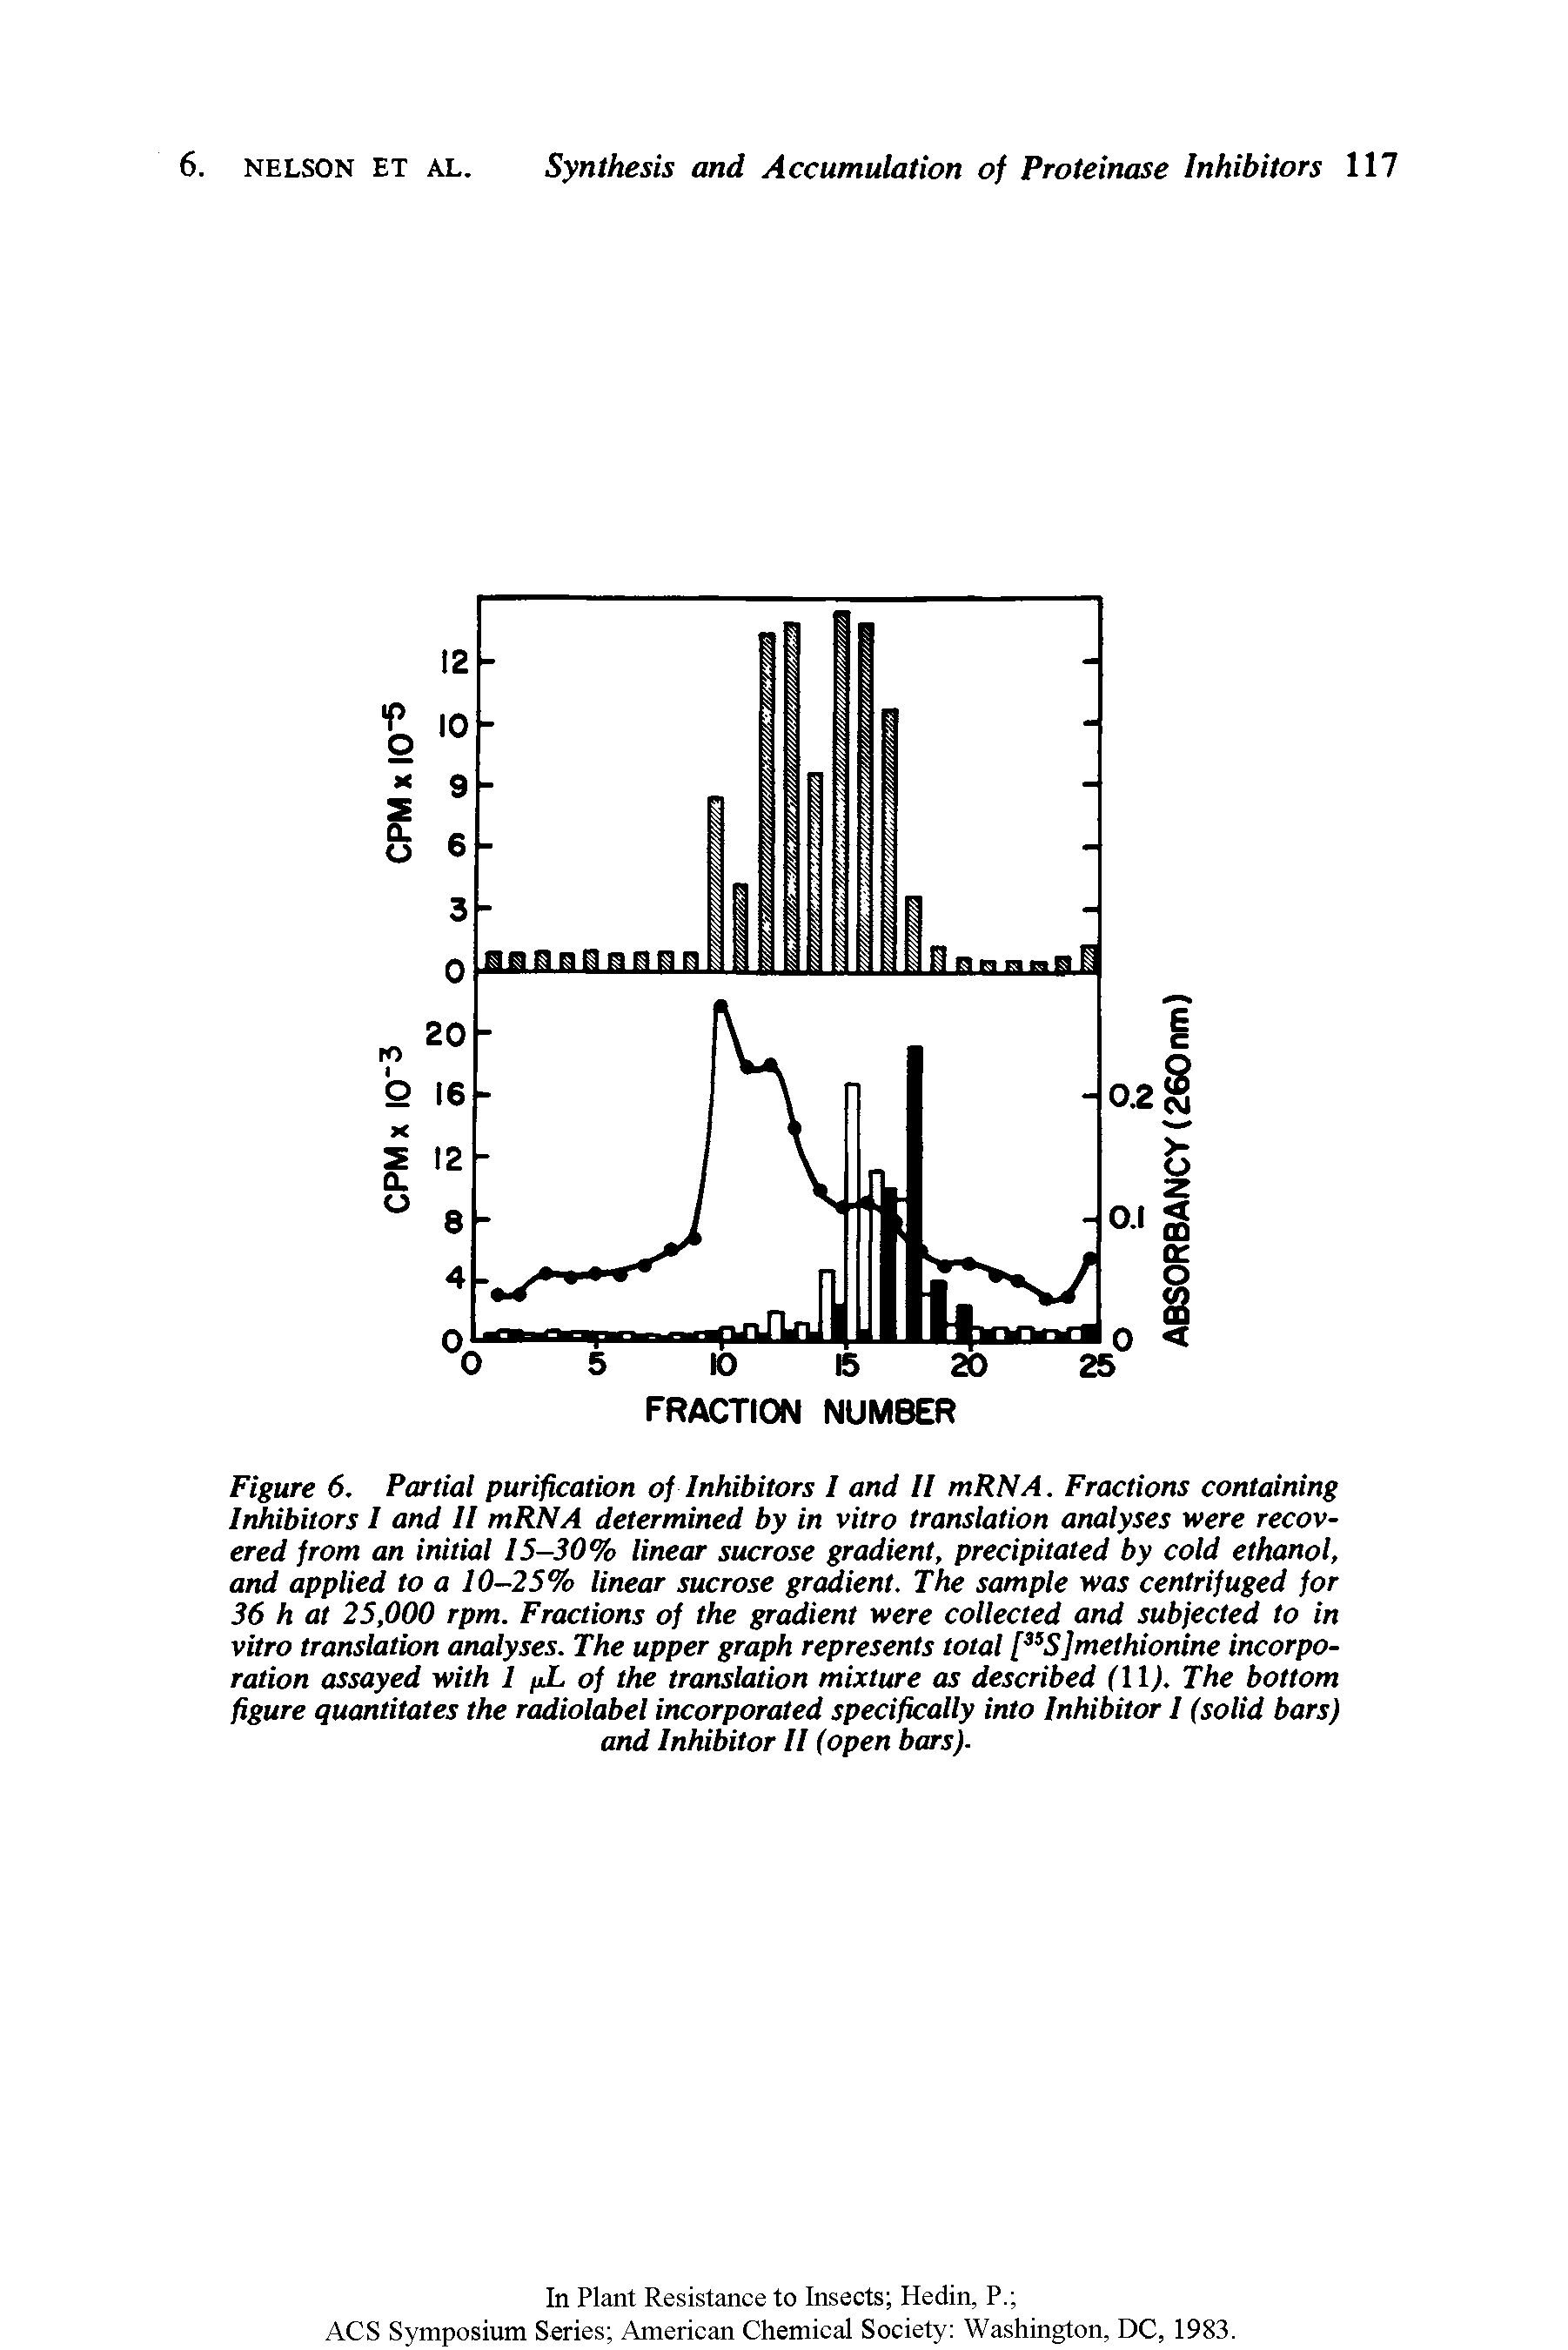 Figure 6. Partial purification of Inhibitors I and II mRNA. Fractions containing Inhibitors I and II mRNA determined by in vitro translation analyses were recovered from an initial 15-30% linear sucrose gradient, precipitated by cold ethanol, and applied to a 10-25% linear sucrose gradient. The sample was centrifuged for 36 h at 25,000 rpm. Fractions of the gradient were collected and subjected to in vitro translation analyses. The upper graph represents total methionine incorporation assayed with 1 jiL of the translation mixture as described (ll). The bottom figure quantitates the radiolabel incorporated specifically into Inhibitor I (solid bars) and Inhibitor II (open bars).